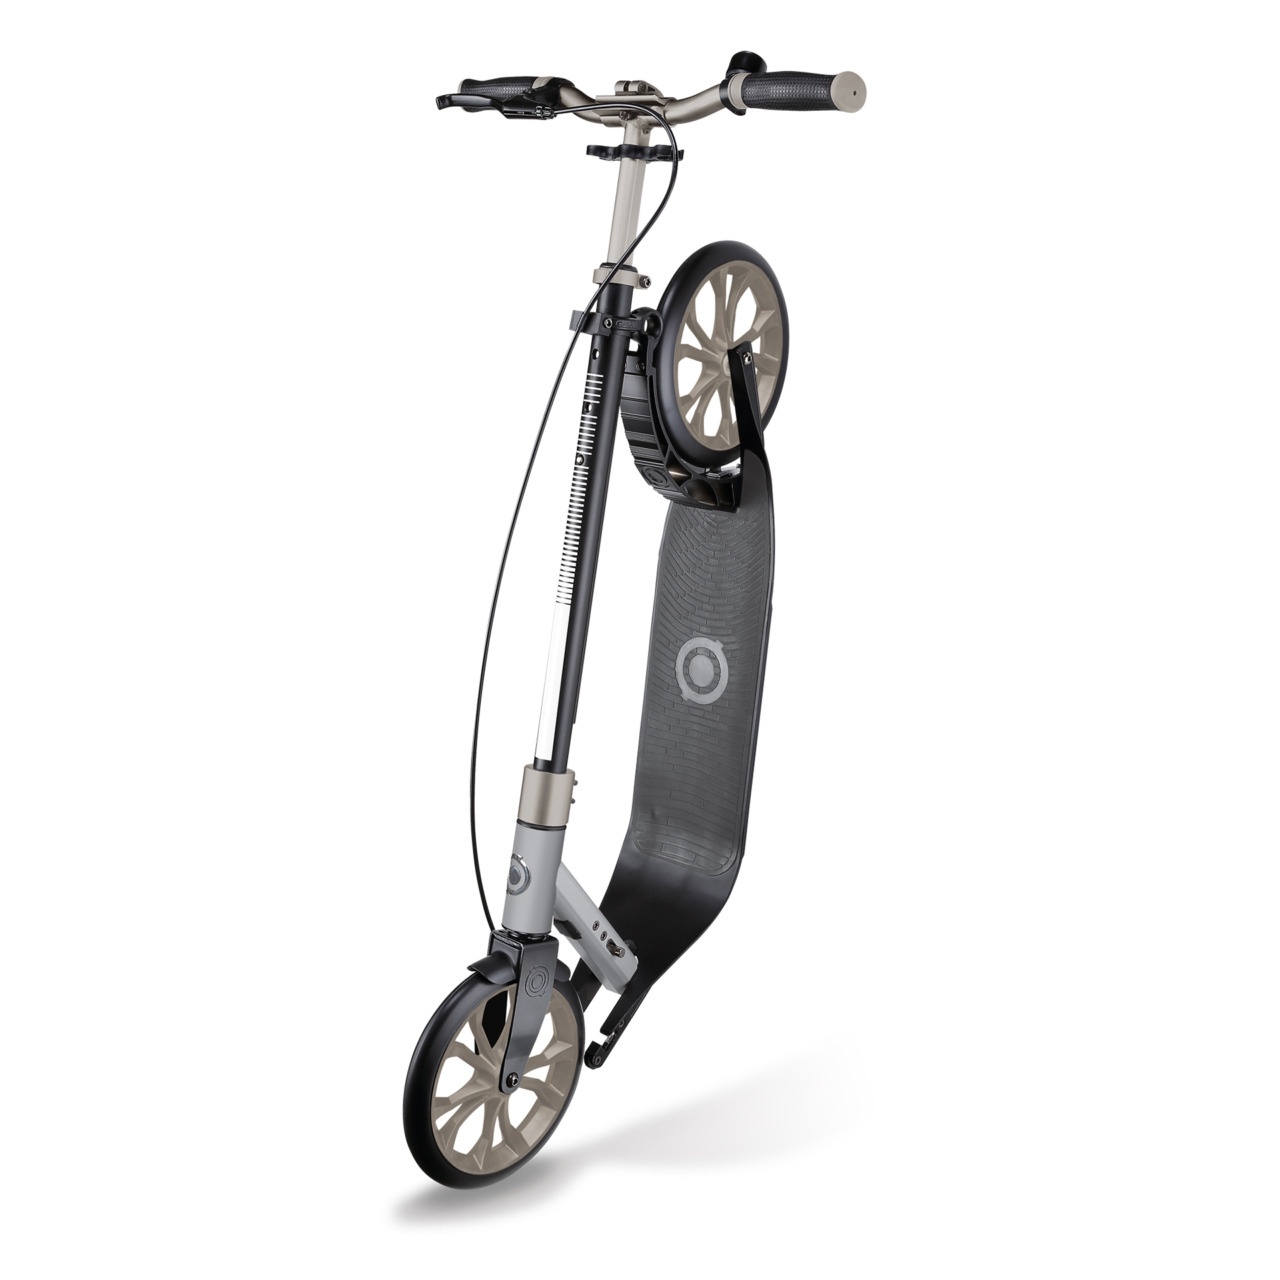 479 102 Folding Adult Scooter